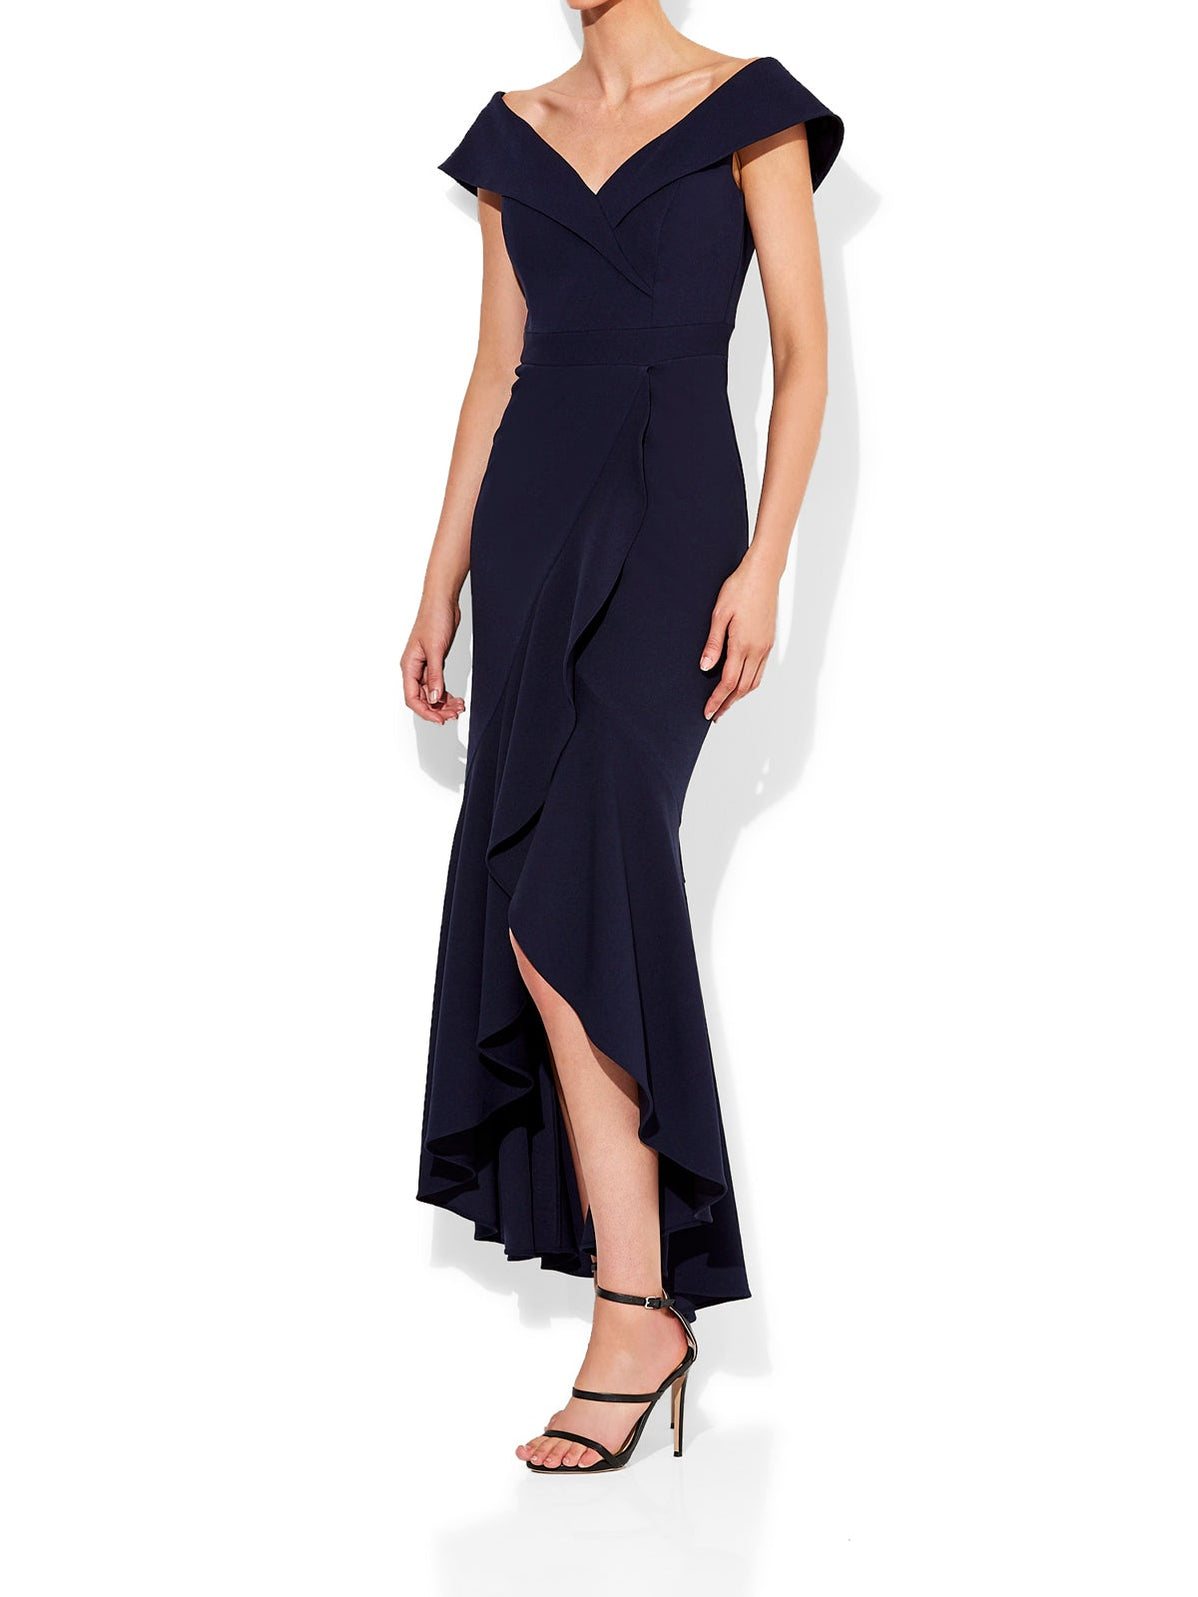 Lola Navy Stretch Crepe Gown | Montique | Event, Wedding and Formal Dresses